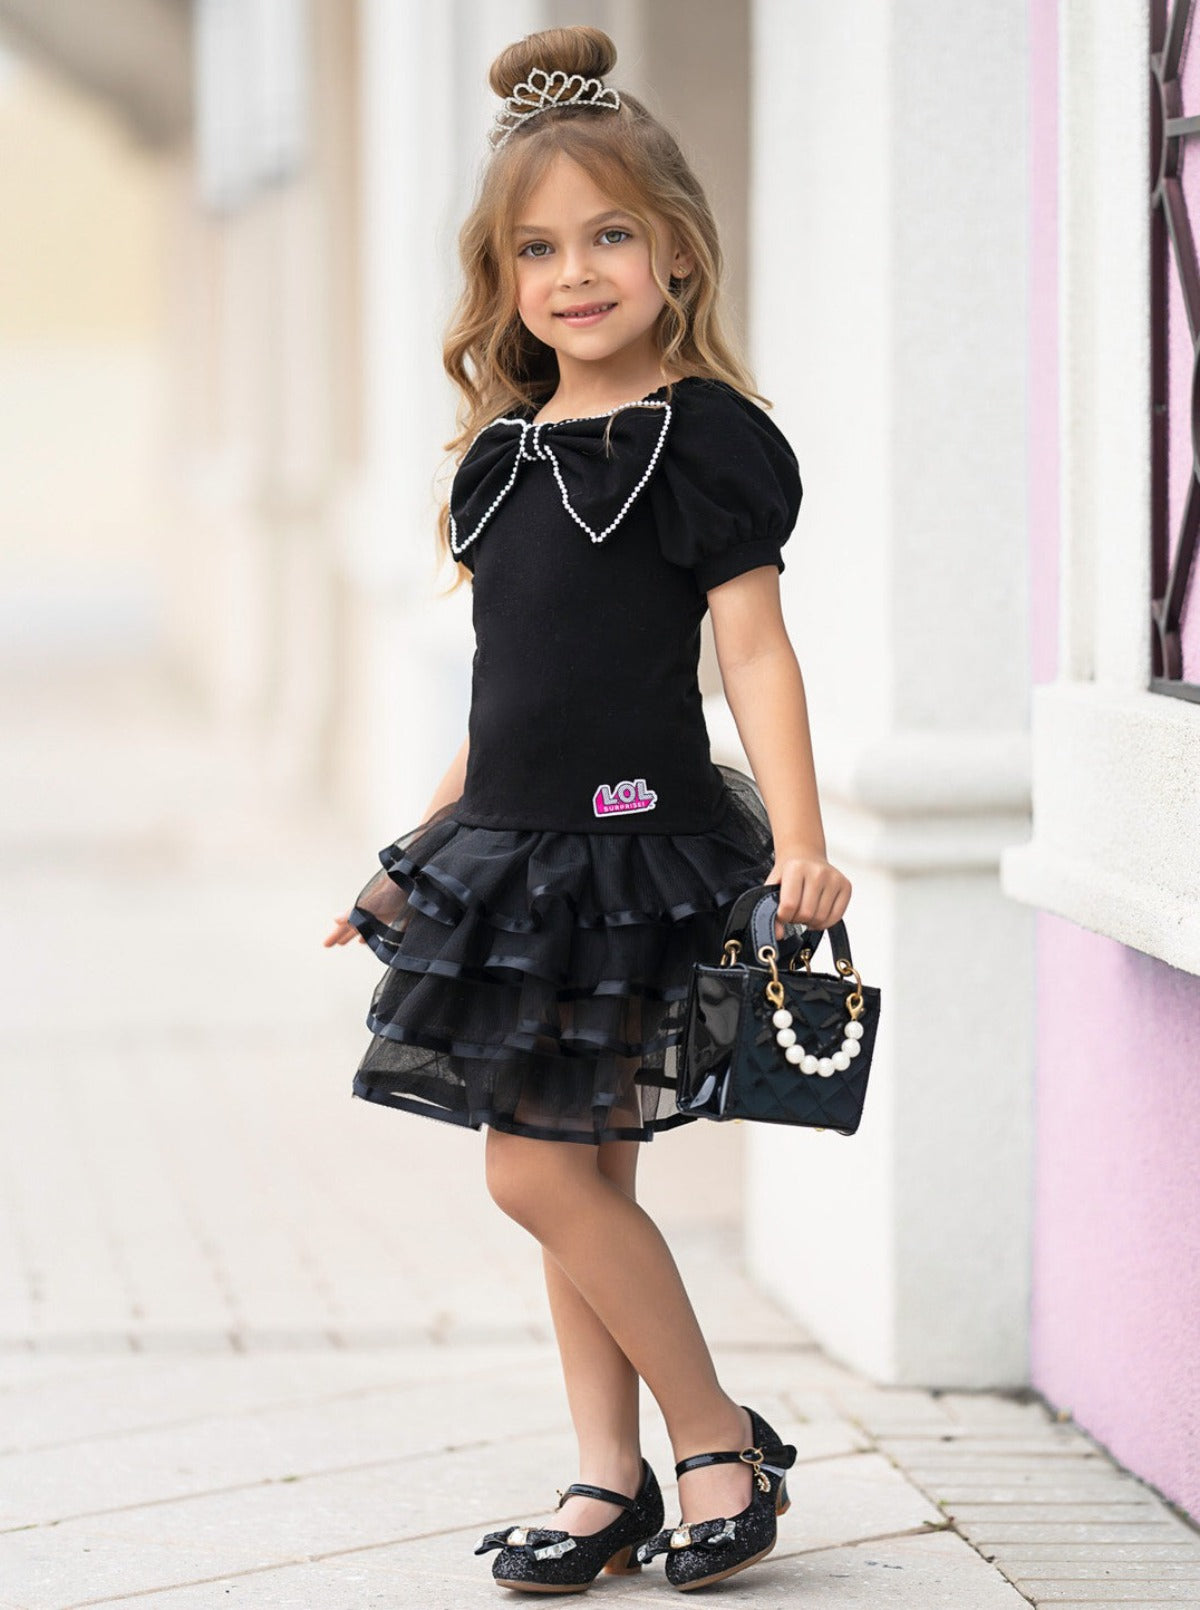 L.O.L. SURPRISE! x Mia Belle Girls IT Baby Tiered Skirt Set